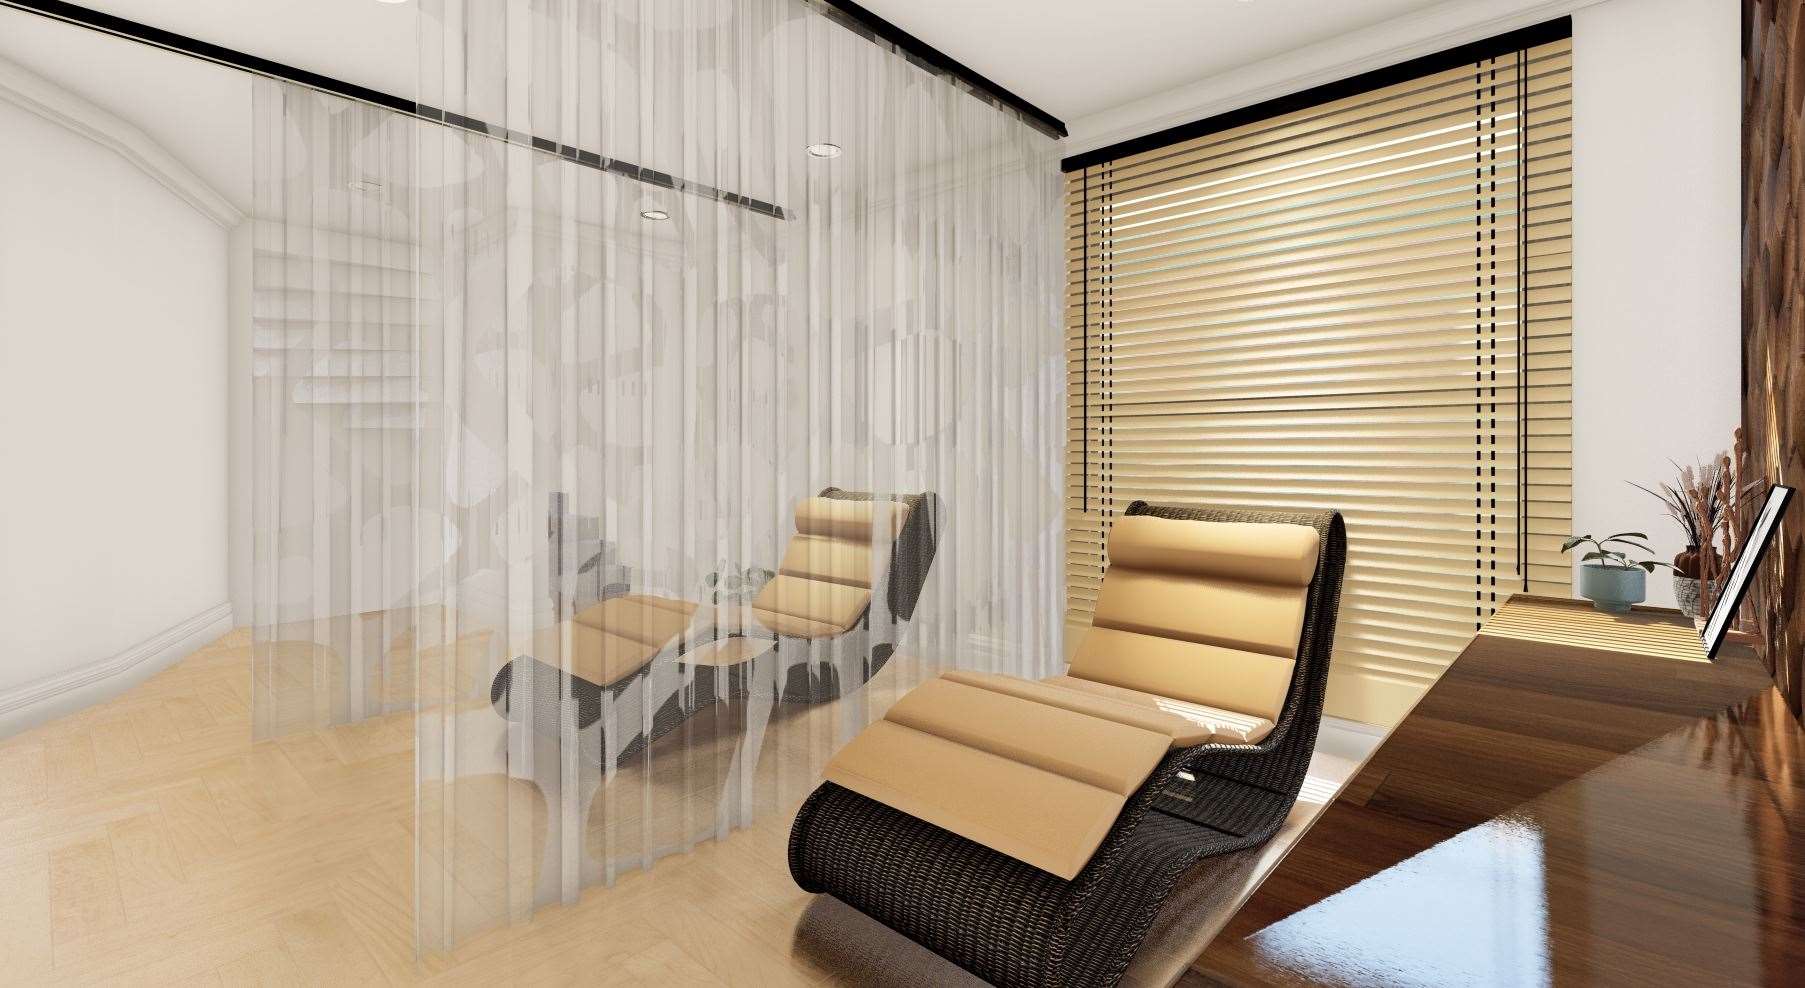 Facials and nail treatments would be on offer, if planning permission is granted for the salon. Picture: ABC planning portal